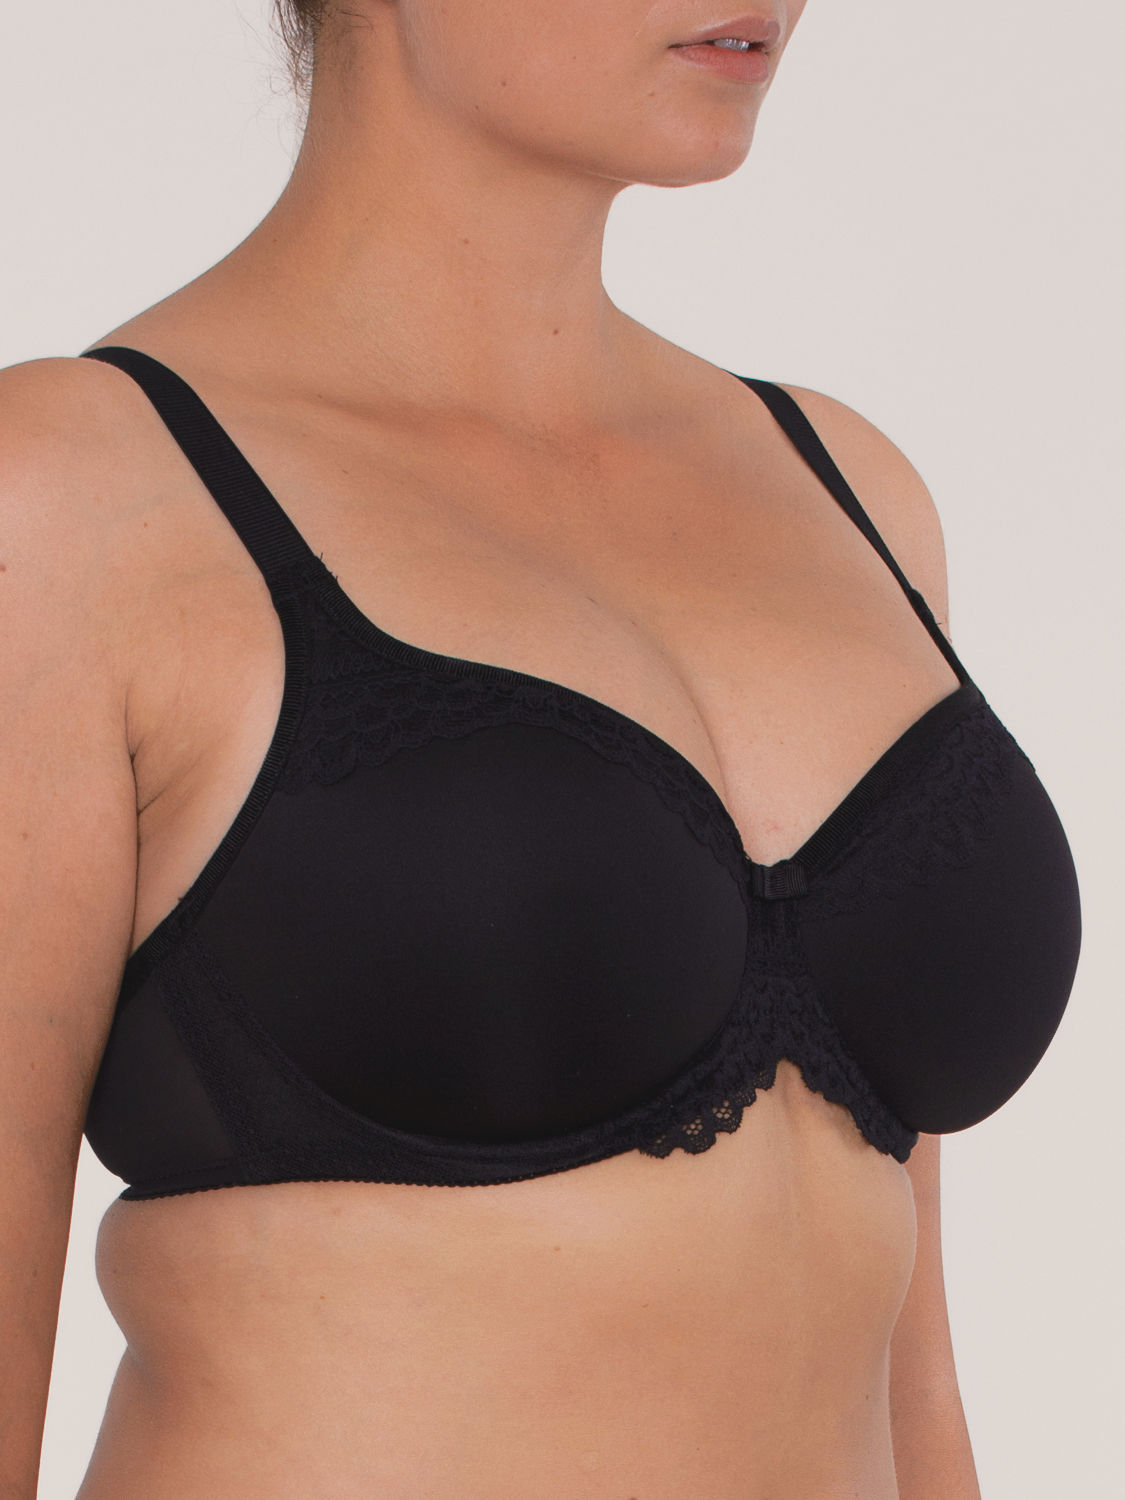 Triumph Beauty-Full Darling WP Spacer-BH BLACK